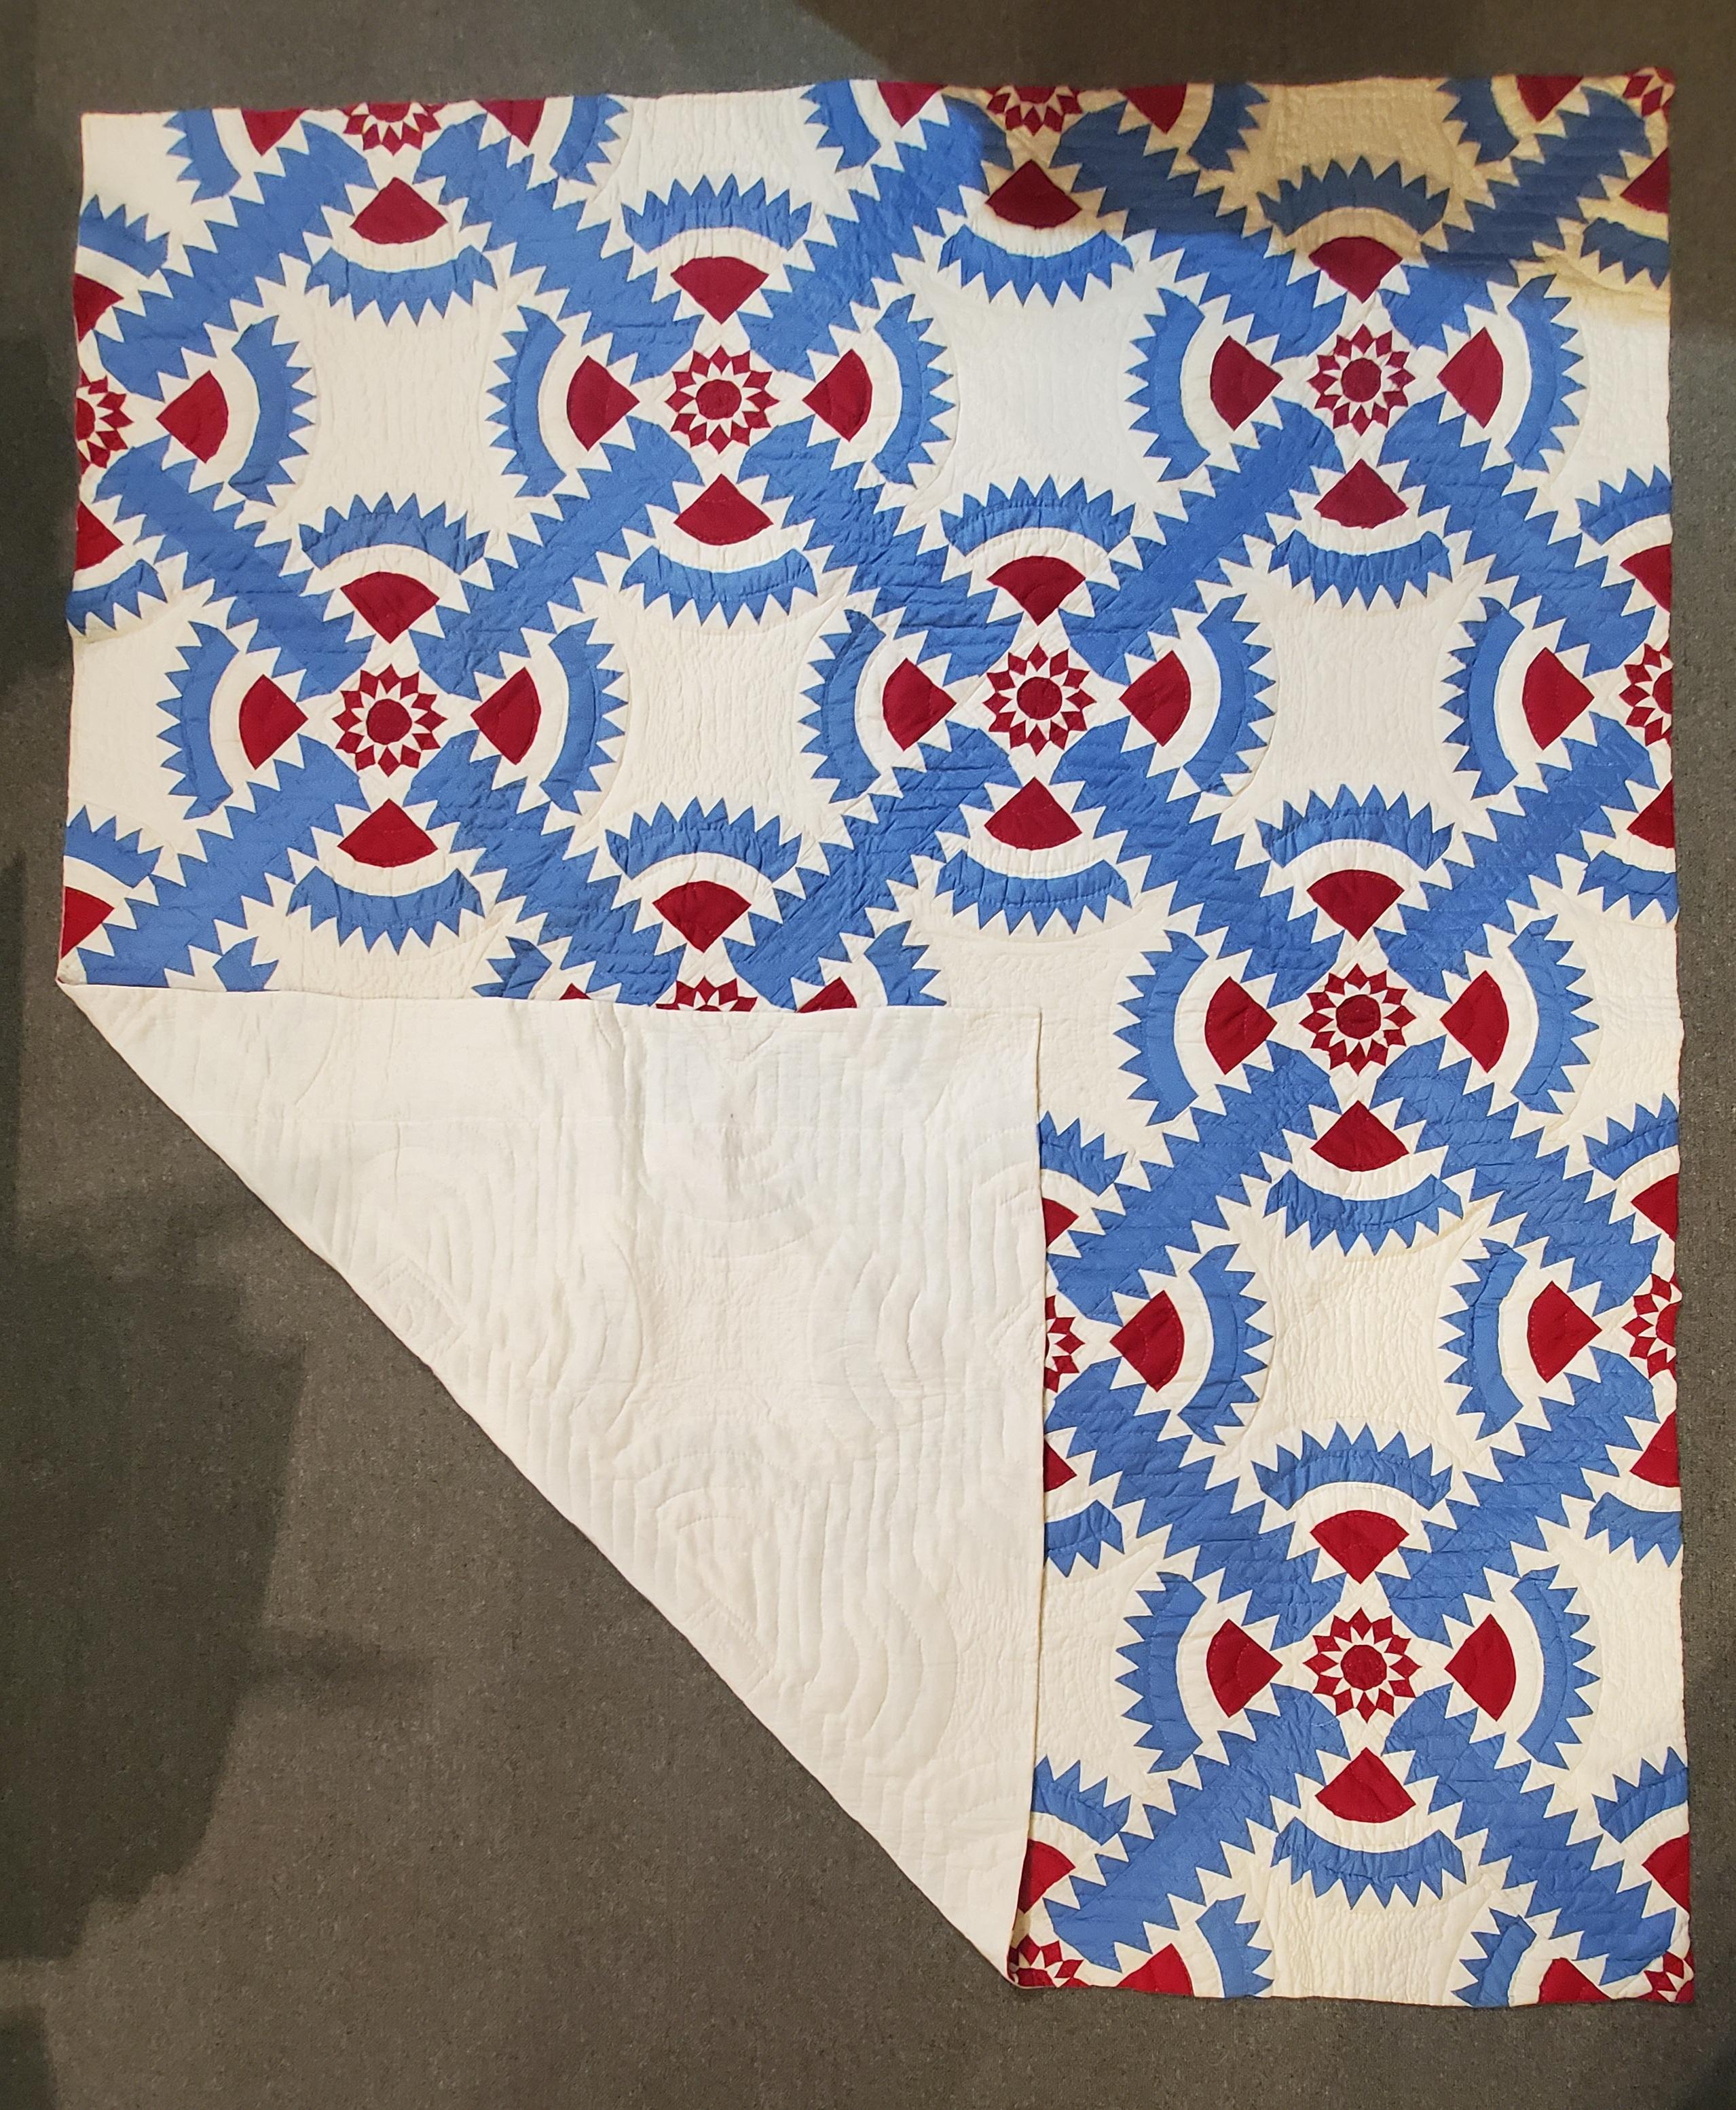 This New York beauty quilt is from Virginia and is in fine unwashed condition. This patriotic and graphic quilt has wonderful piecework and in great condition.